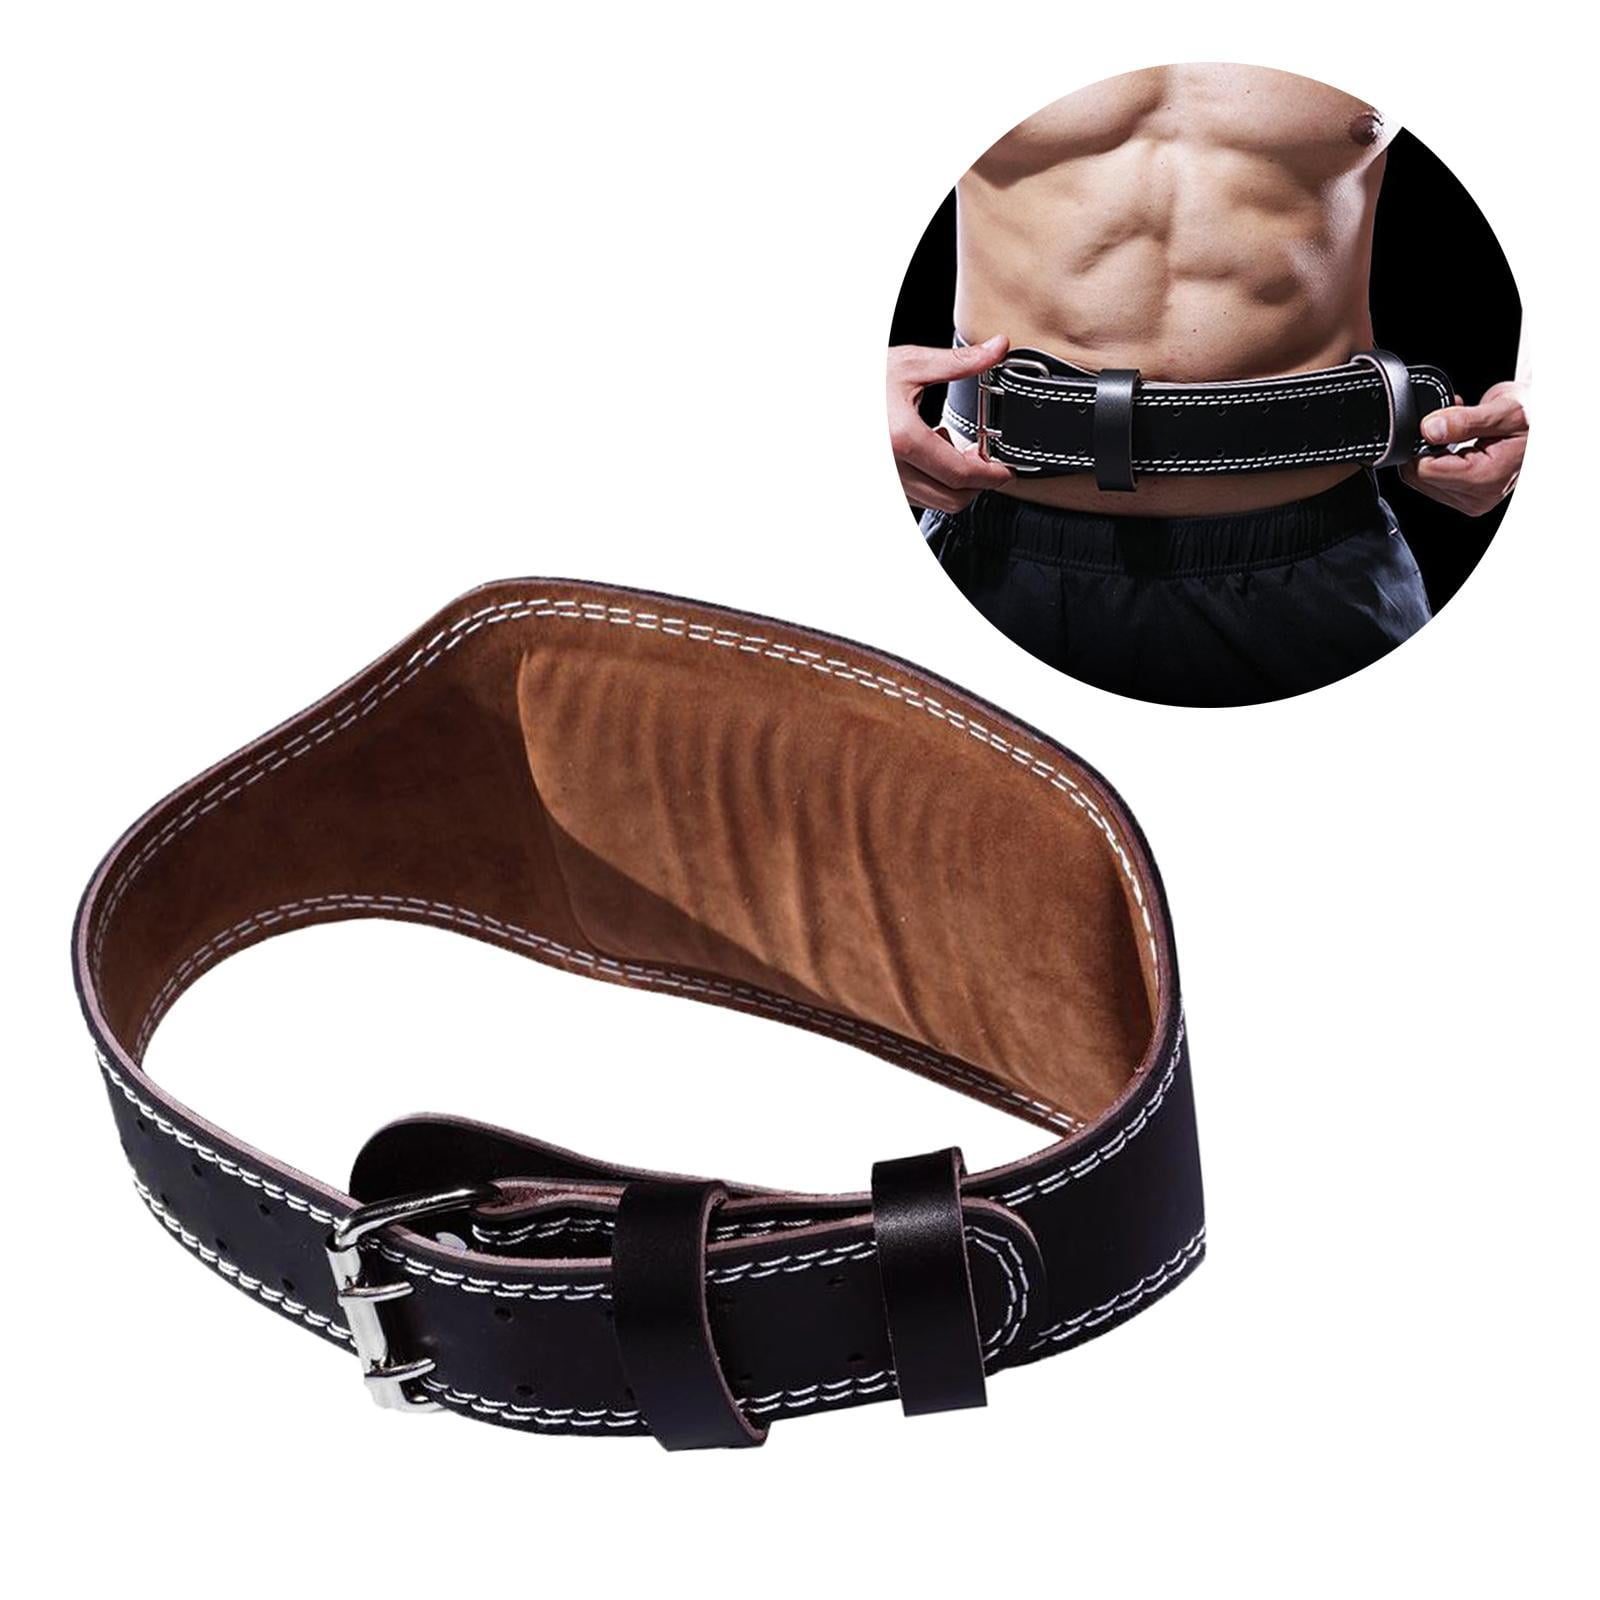 Adjustable Buckle Posture Corrector SM SunniMix Weightlifting Belt PU Leather for Men and Women Deadlift Squats Powerlifting Bodybuilding Dumbbell Gym Workout 